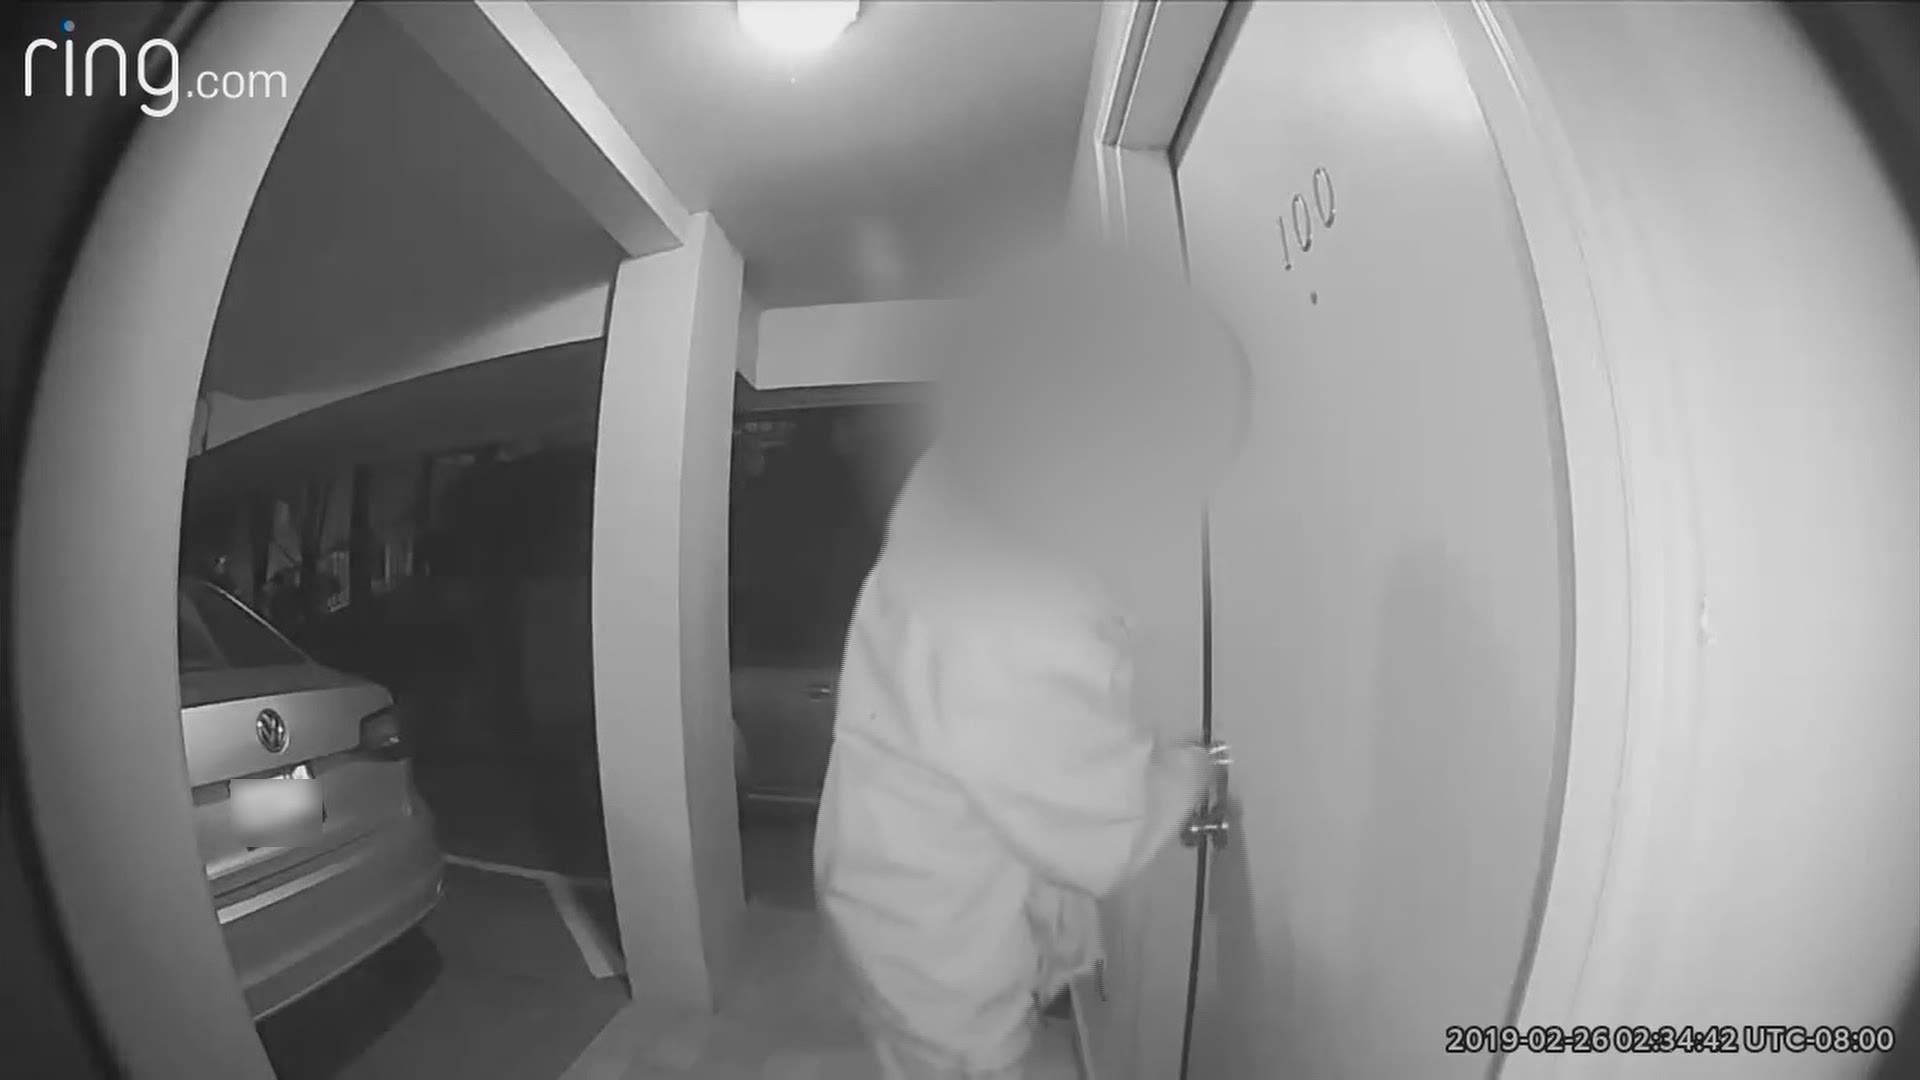 A Seattle woman said she's had many sleepless nights after security cameras outside her condo revealed ongoing problems.